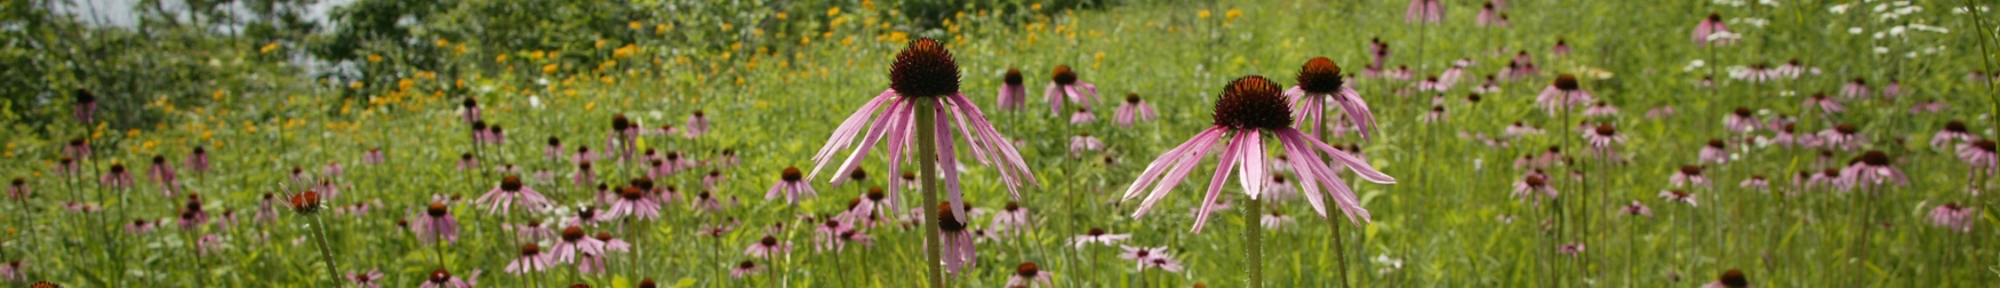 banner image with purple cone flowers